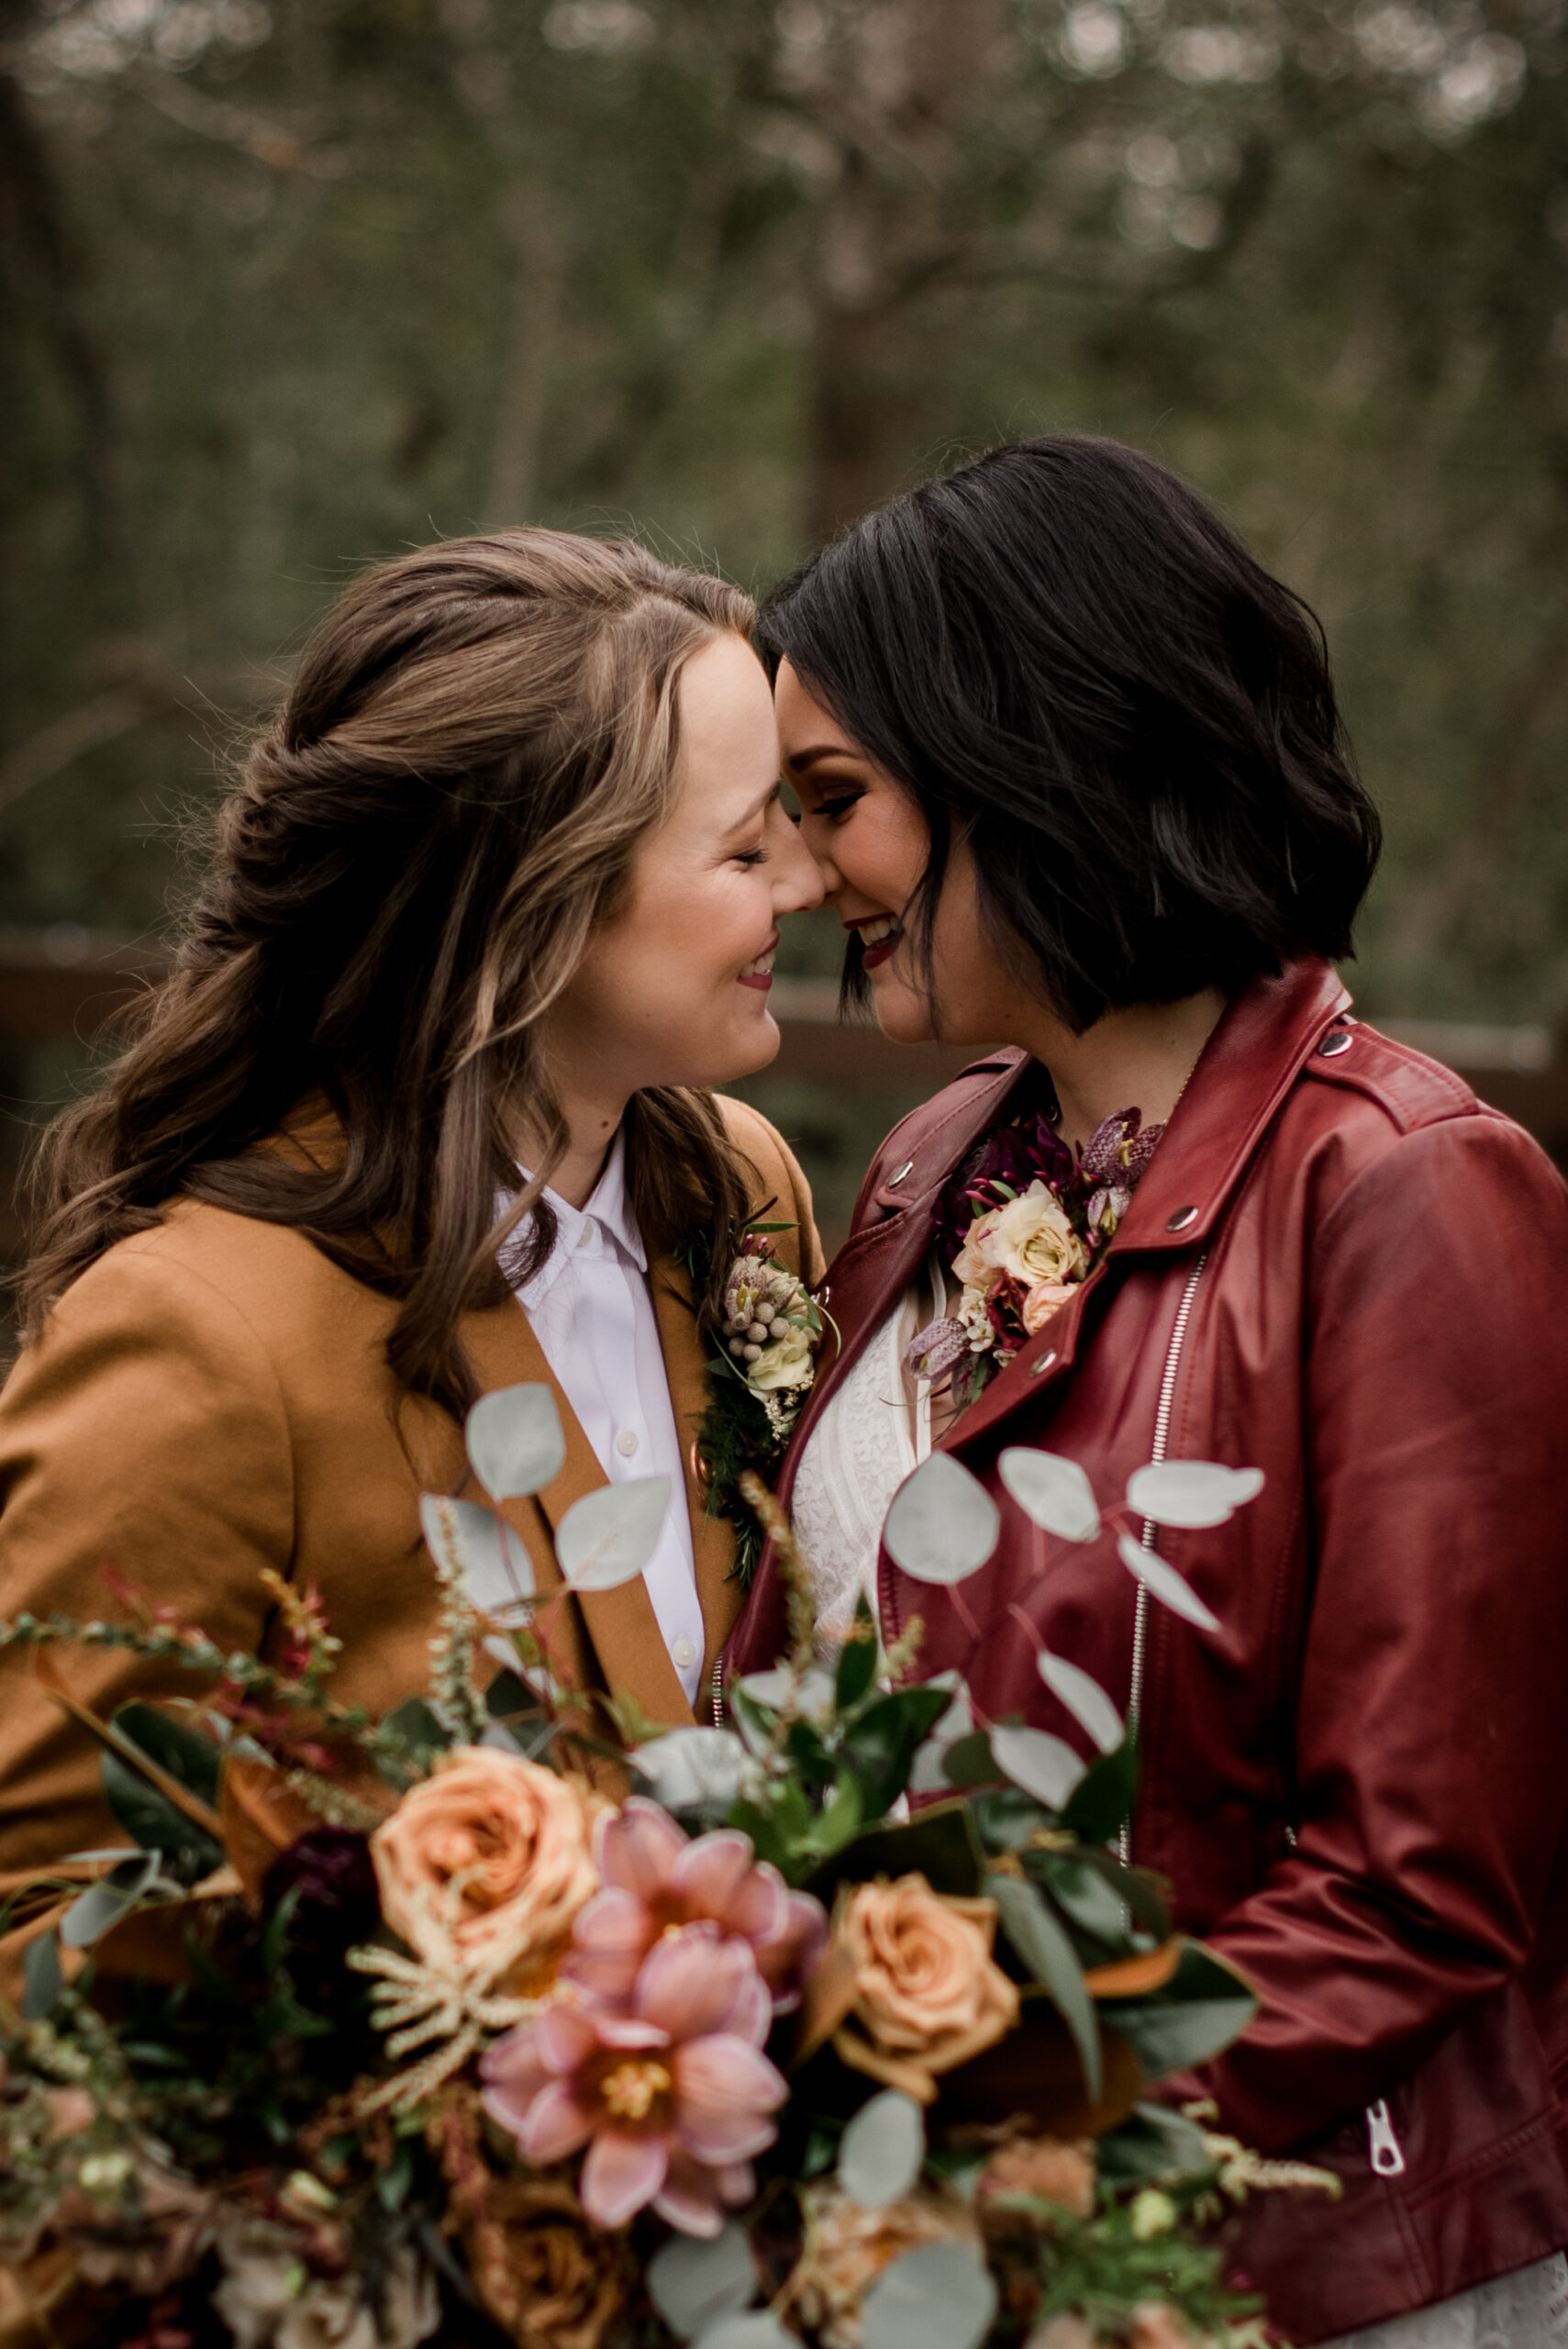 Same sex couple smiling at each other holding a pink and peach colored bouquet, one with light brown hair wearing a mustard jacket and white shirt and the other with raven colored hair wearing a cranberry colored jacket over a white wedding gown photo by Wedding Photographer in Houston, Jamie Hardin Photography